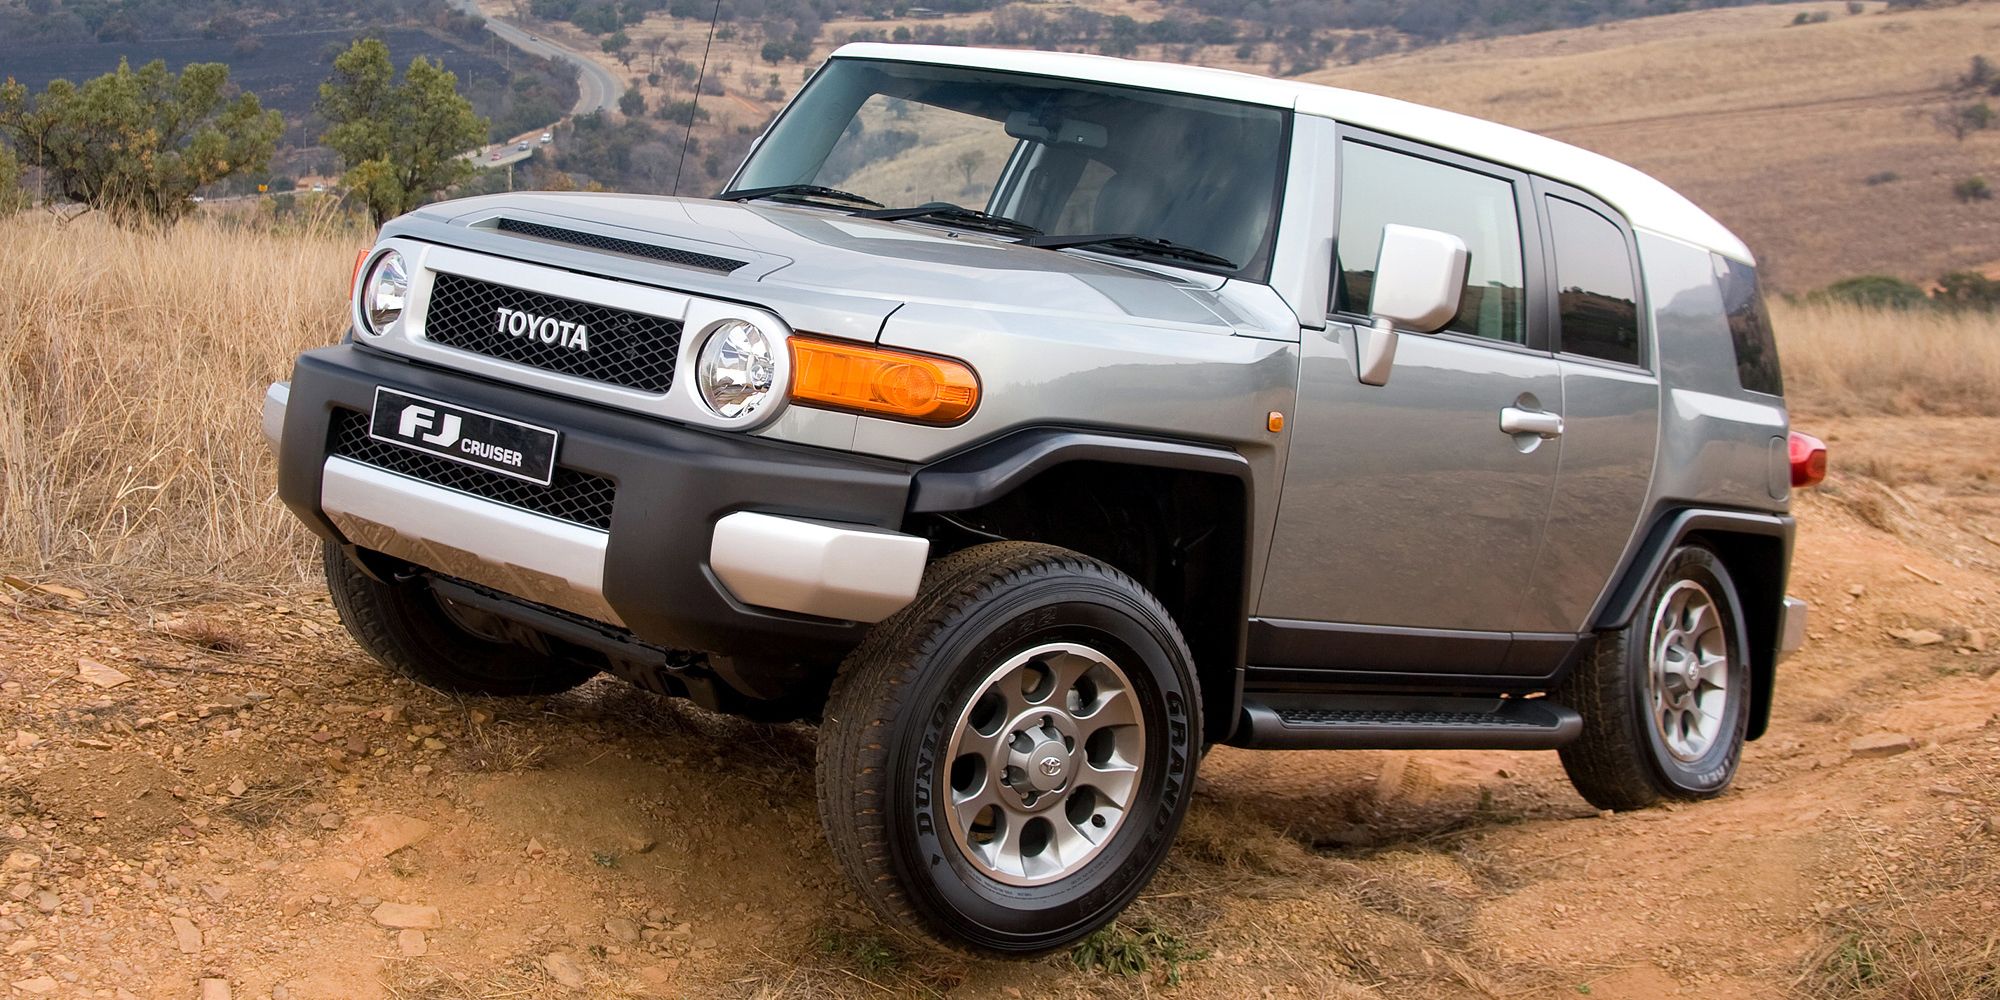 The front of the FJ Cruiser rock crawling